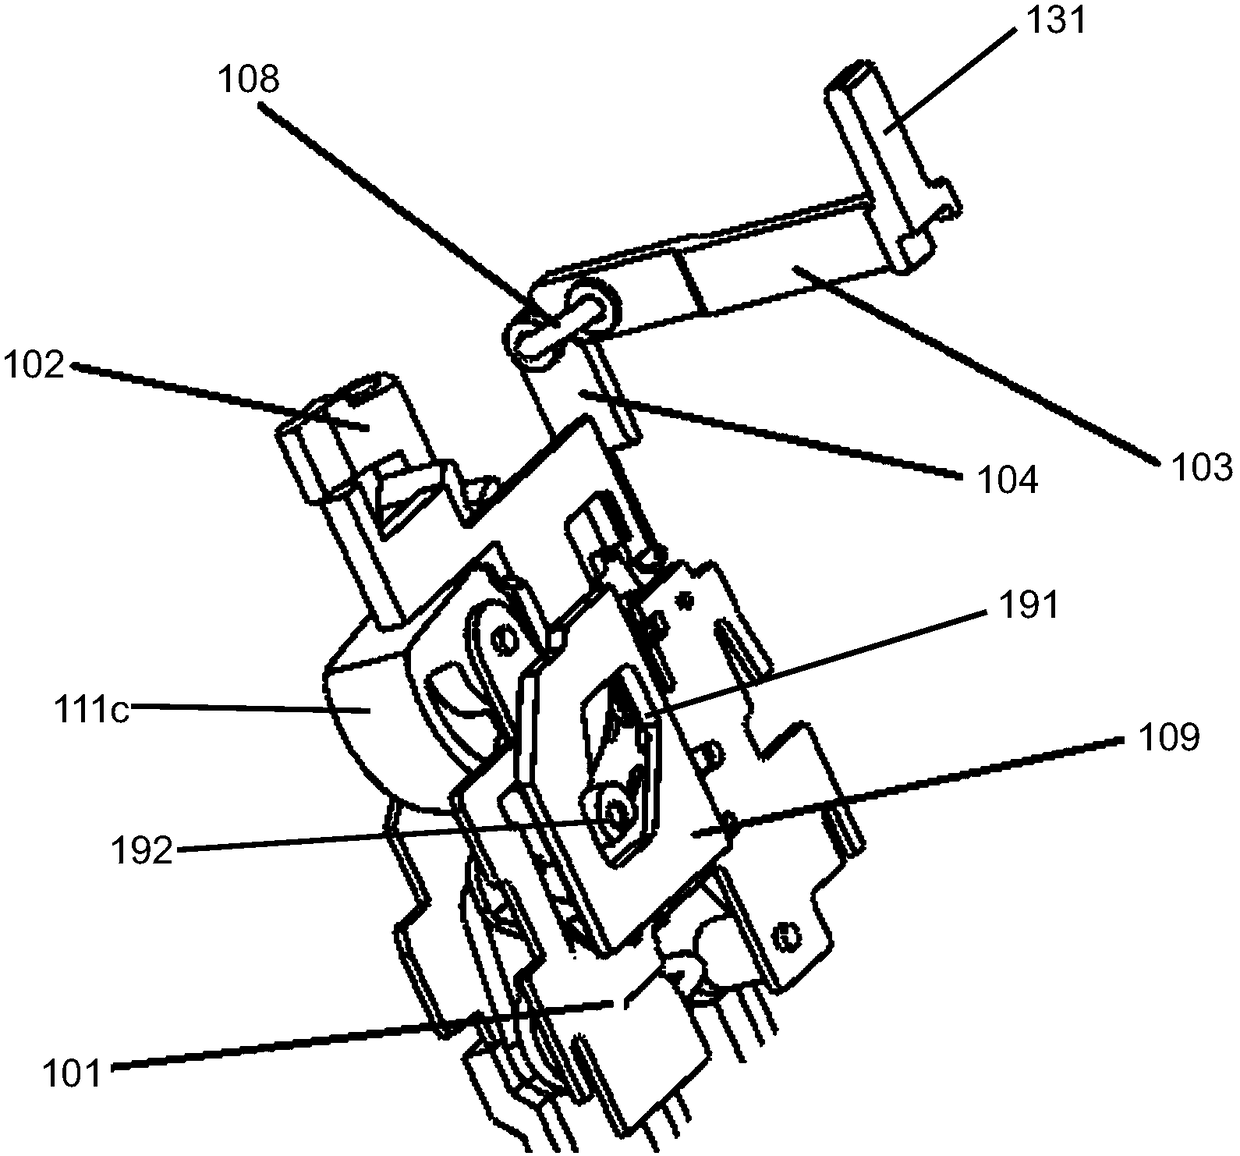 Auxiliary mechanism of the operating mechanism